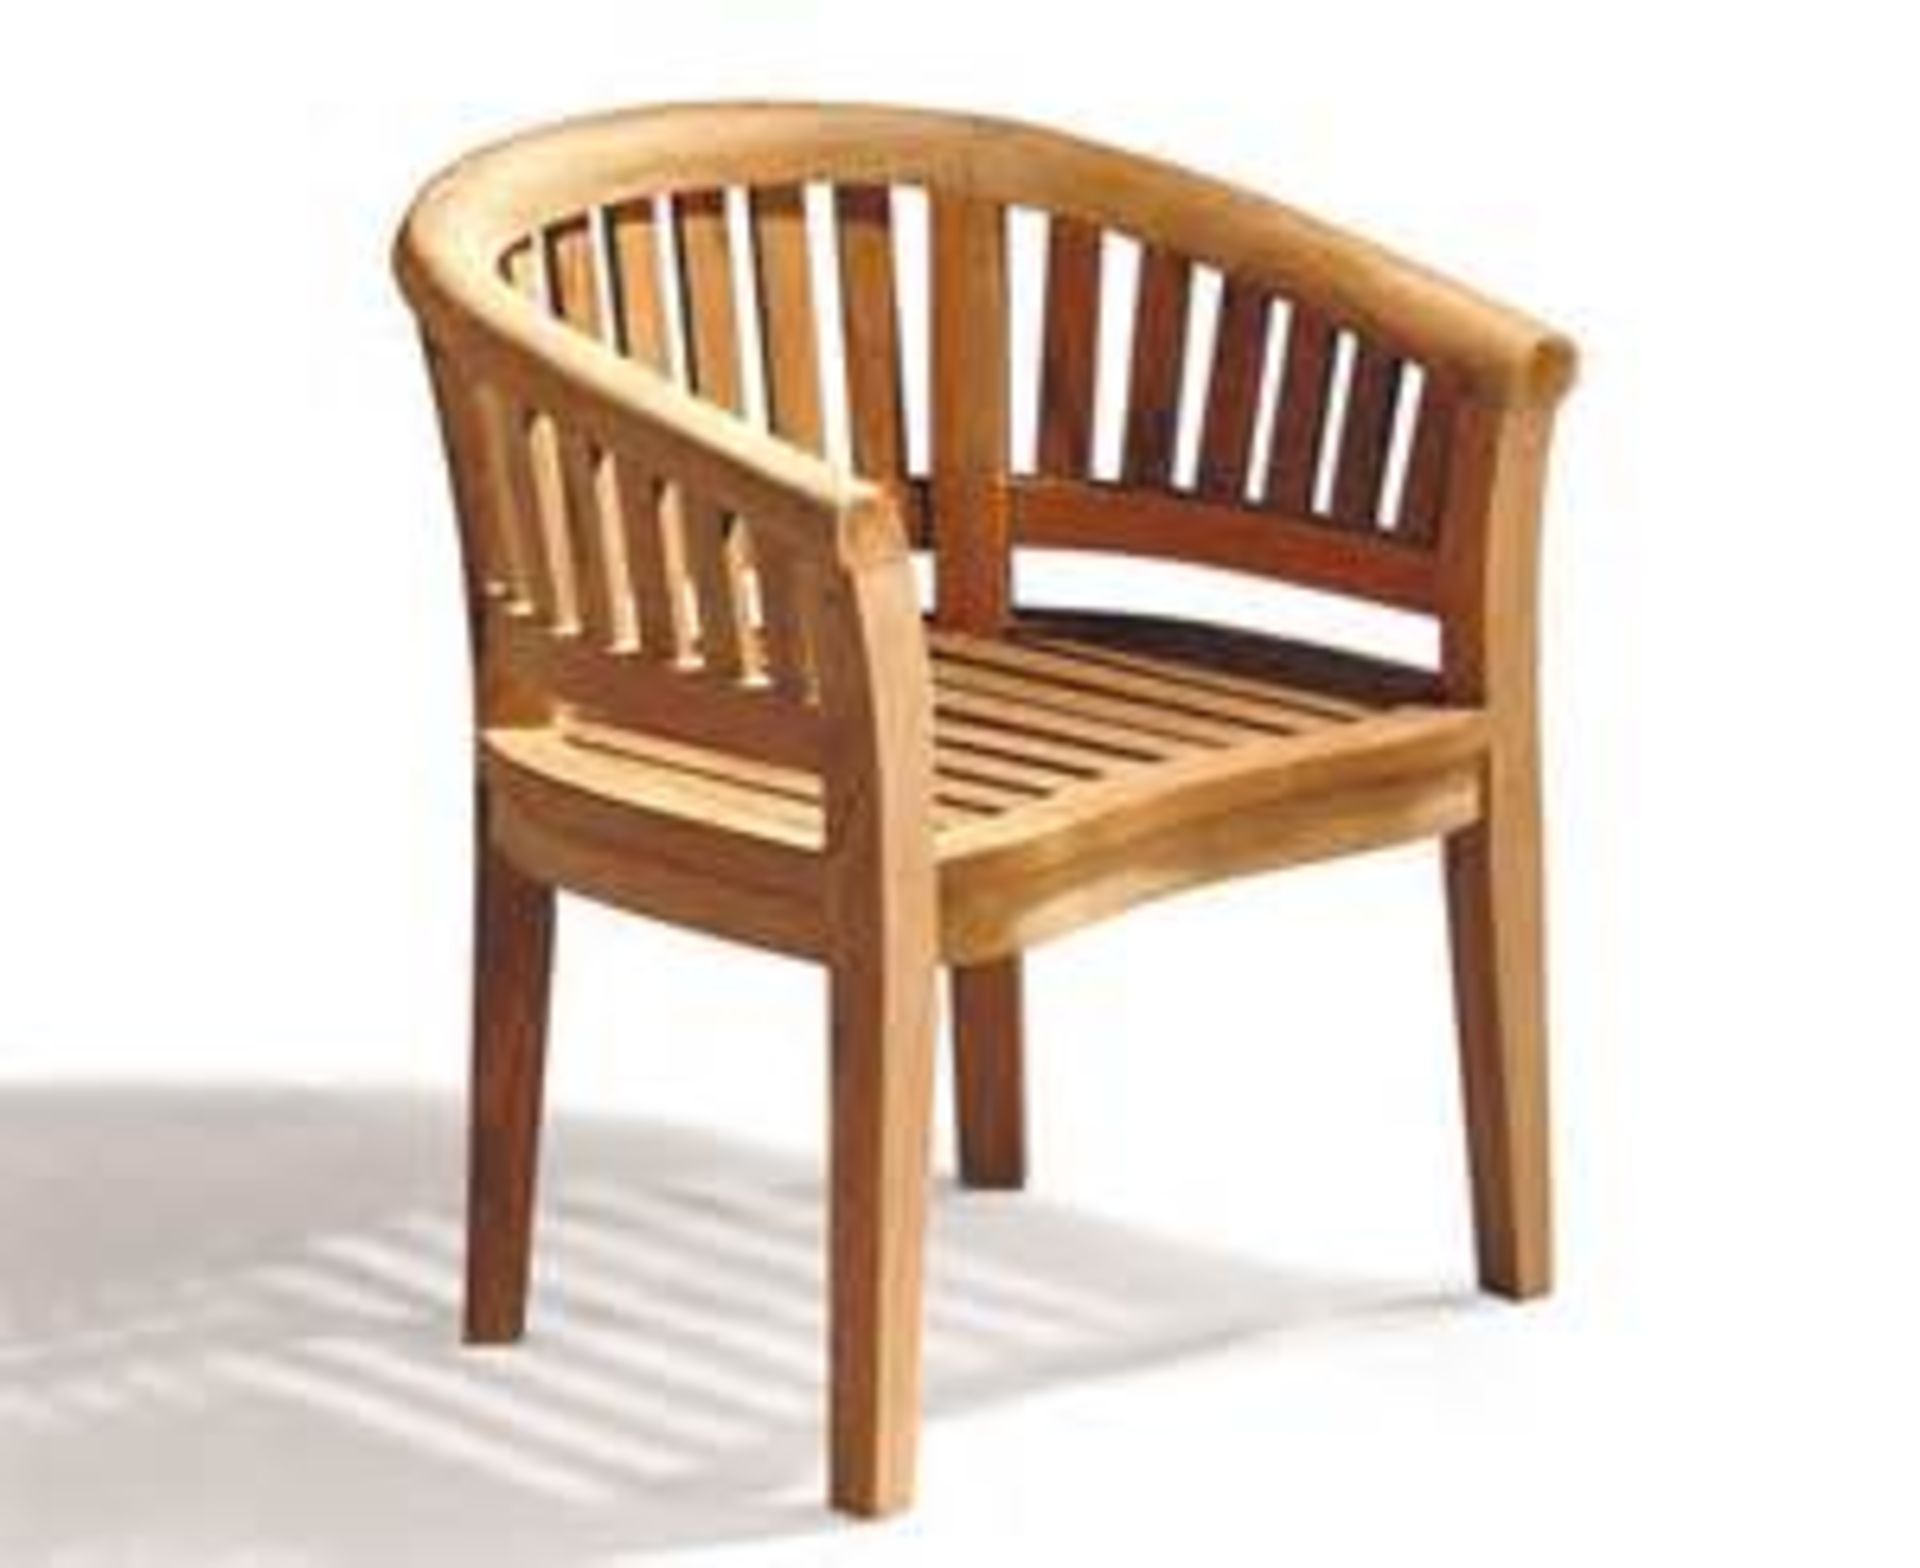 V Brand New TEAK BANANA CHAIR /DIMENSIONS 88 x 65 x 86 /NOTE: Item is Available Approx 5 Days From